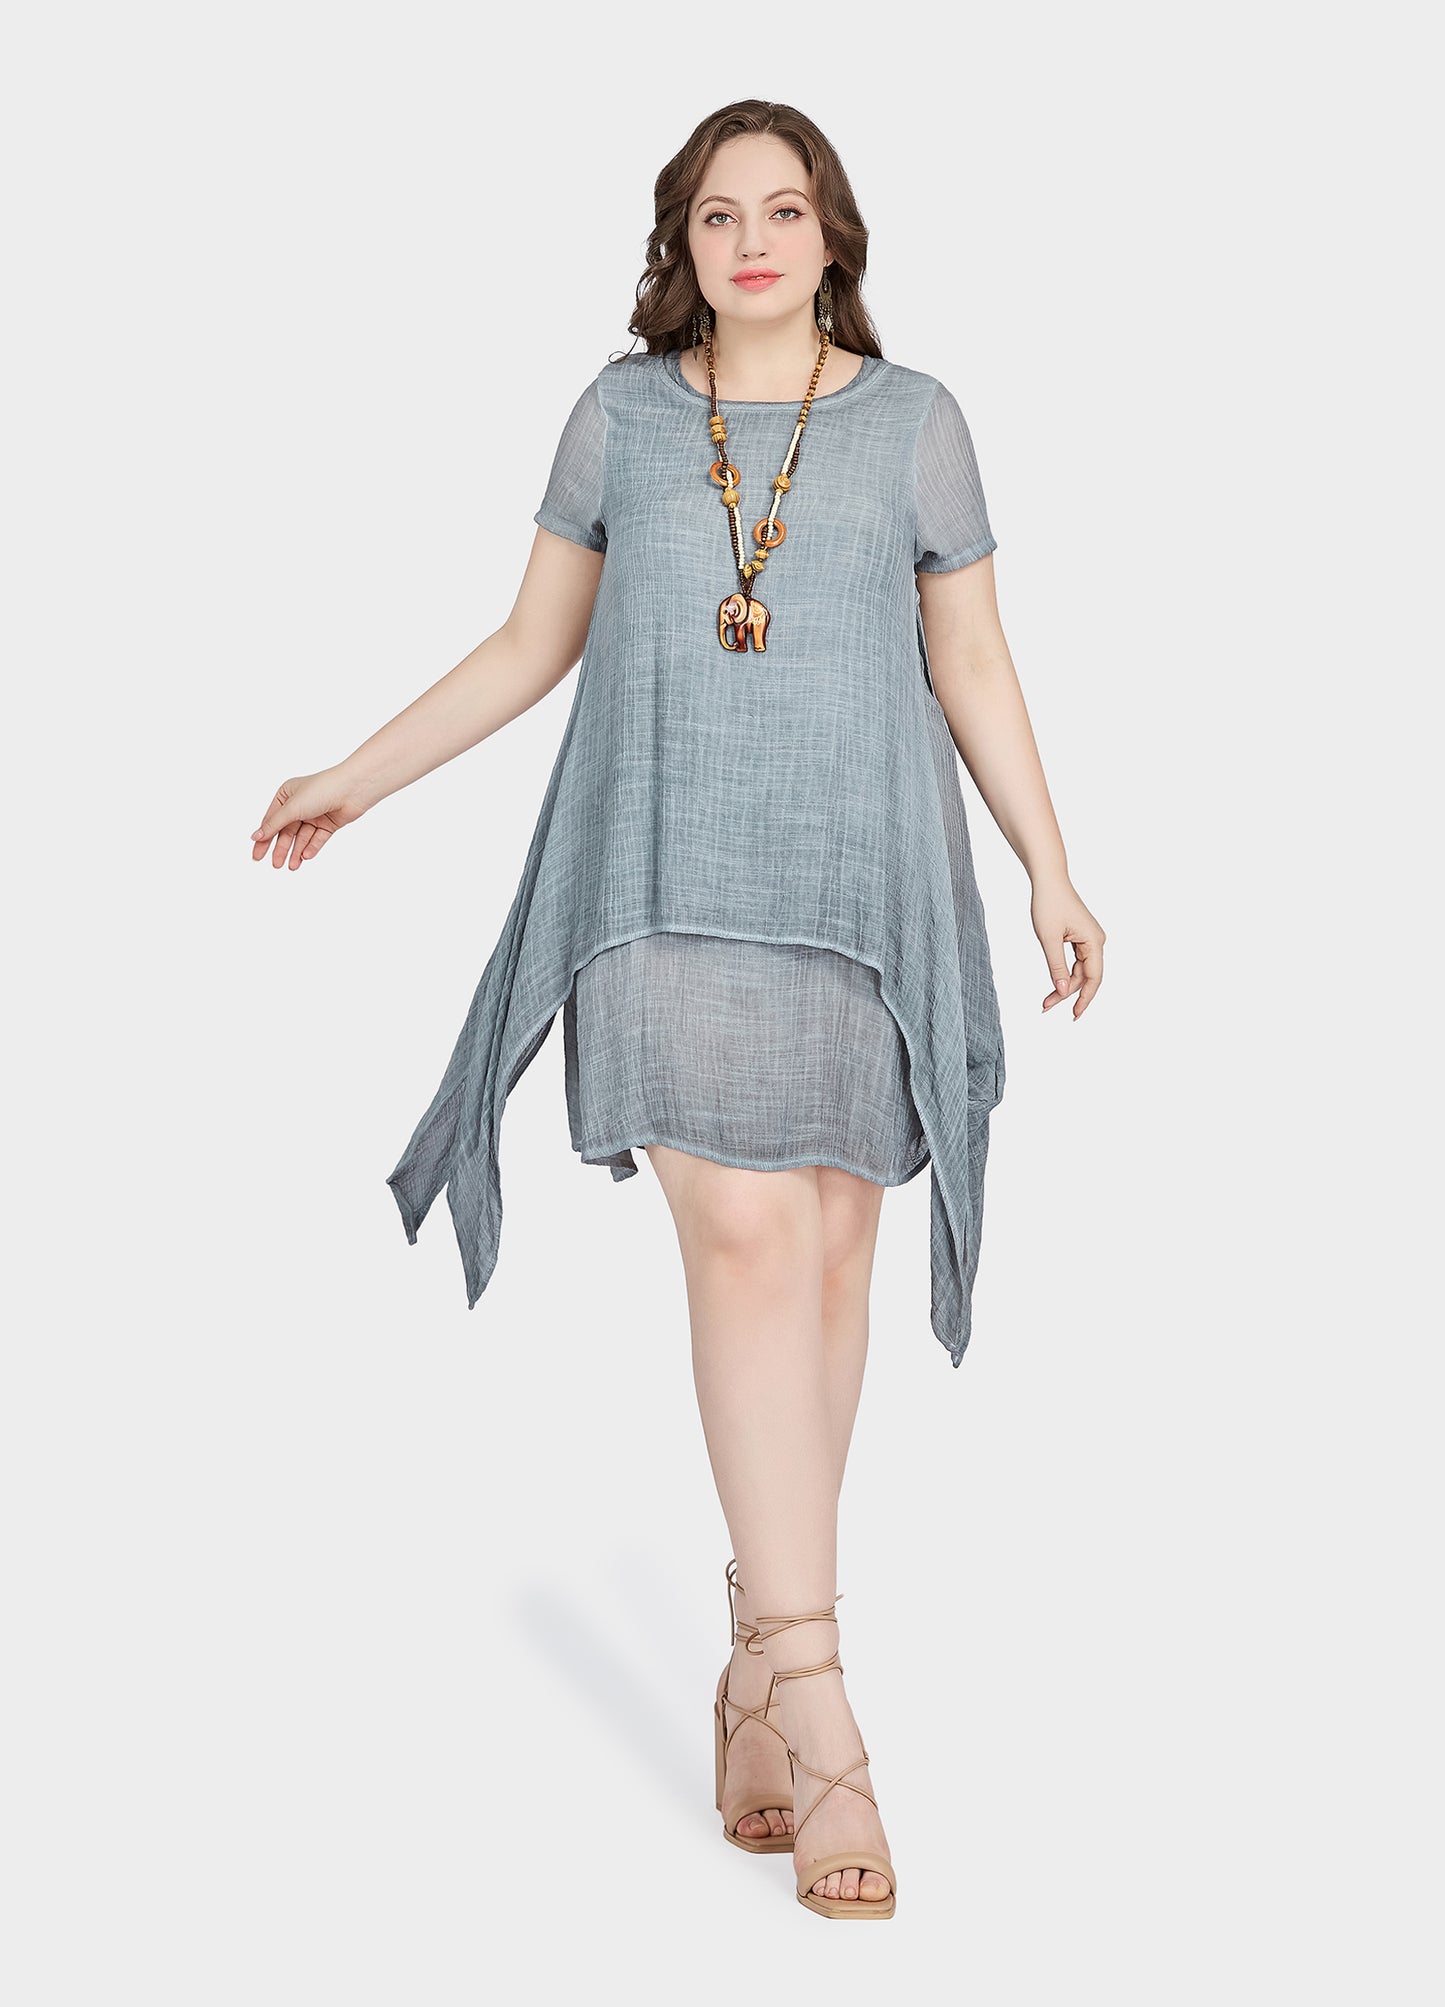 MECALA Women's Plus Size Dress with Wooden Elephant Necklace(Clearance)